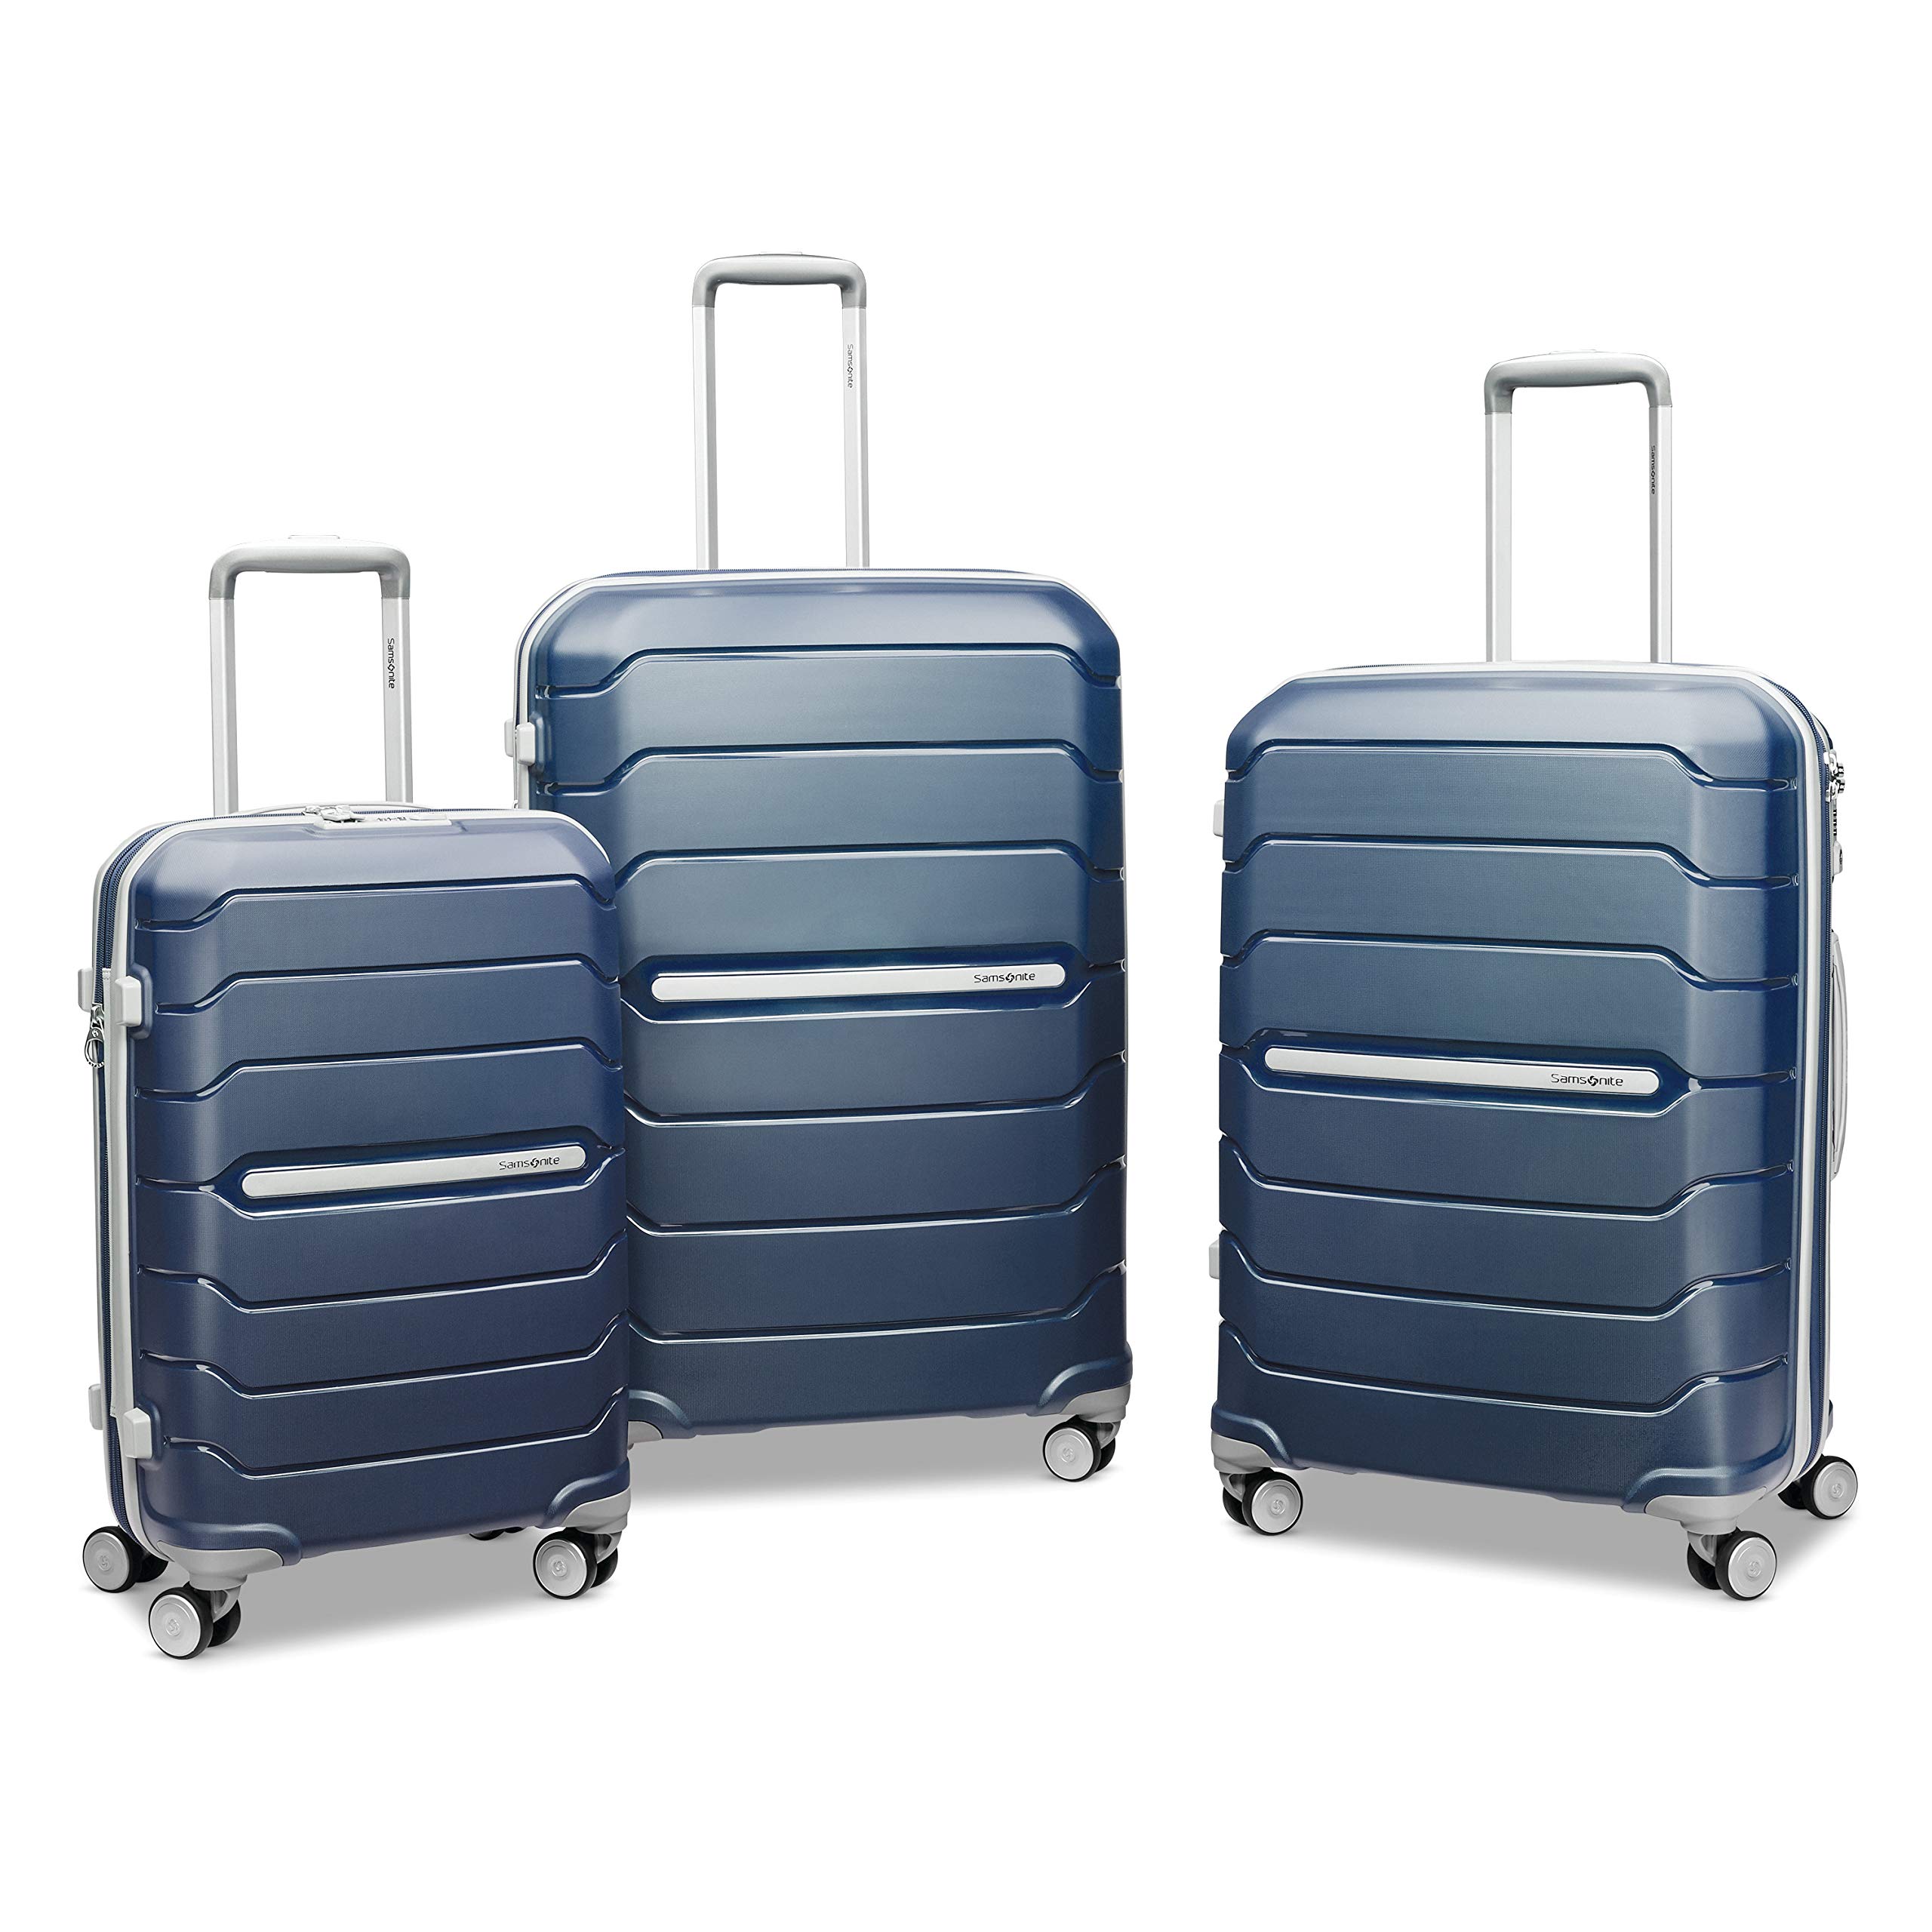 Samsonite Freeform Hardside Expandable with Double Spinner Wheels, Carry-On 21-Inch, Navy